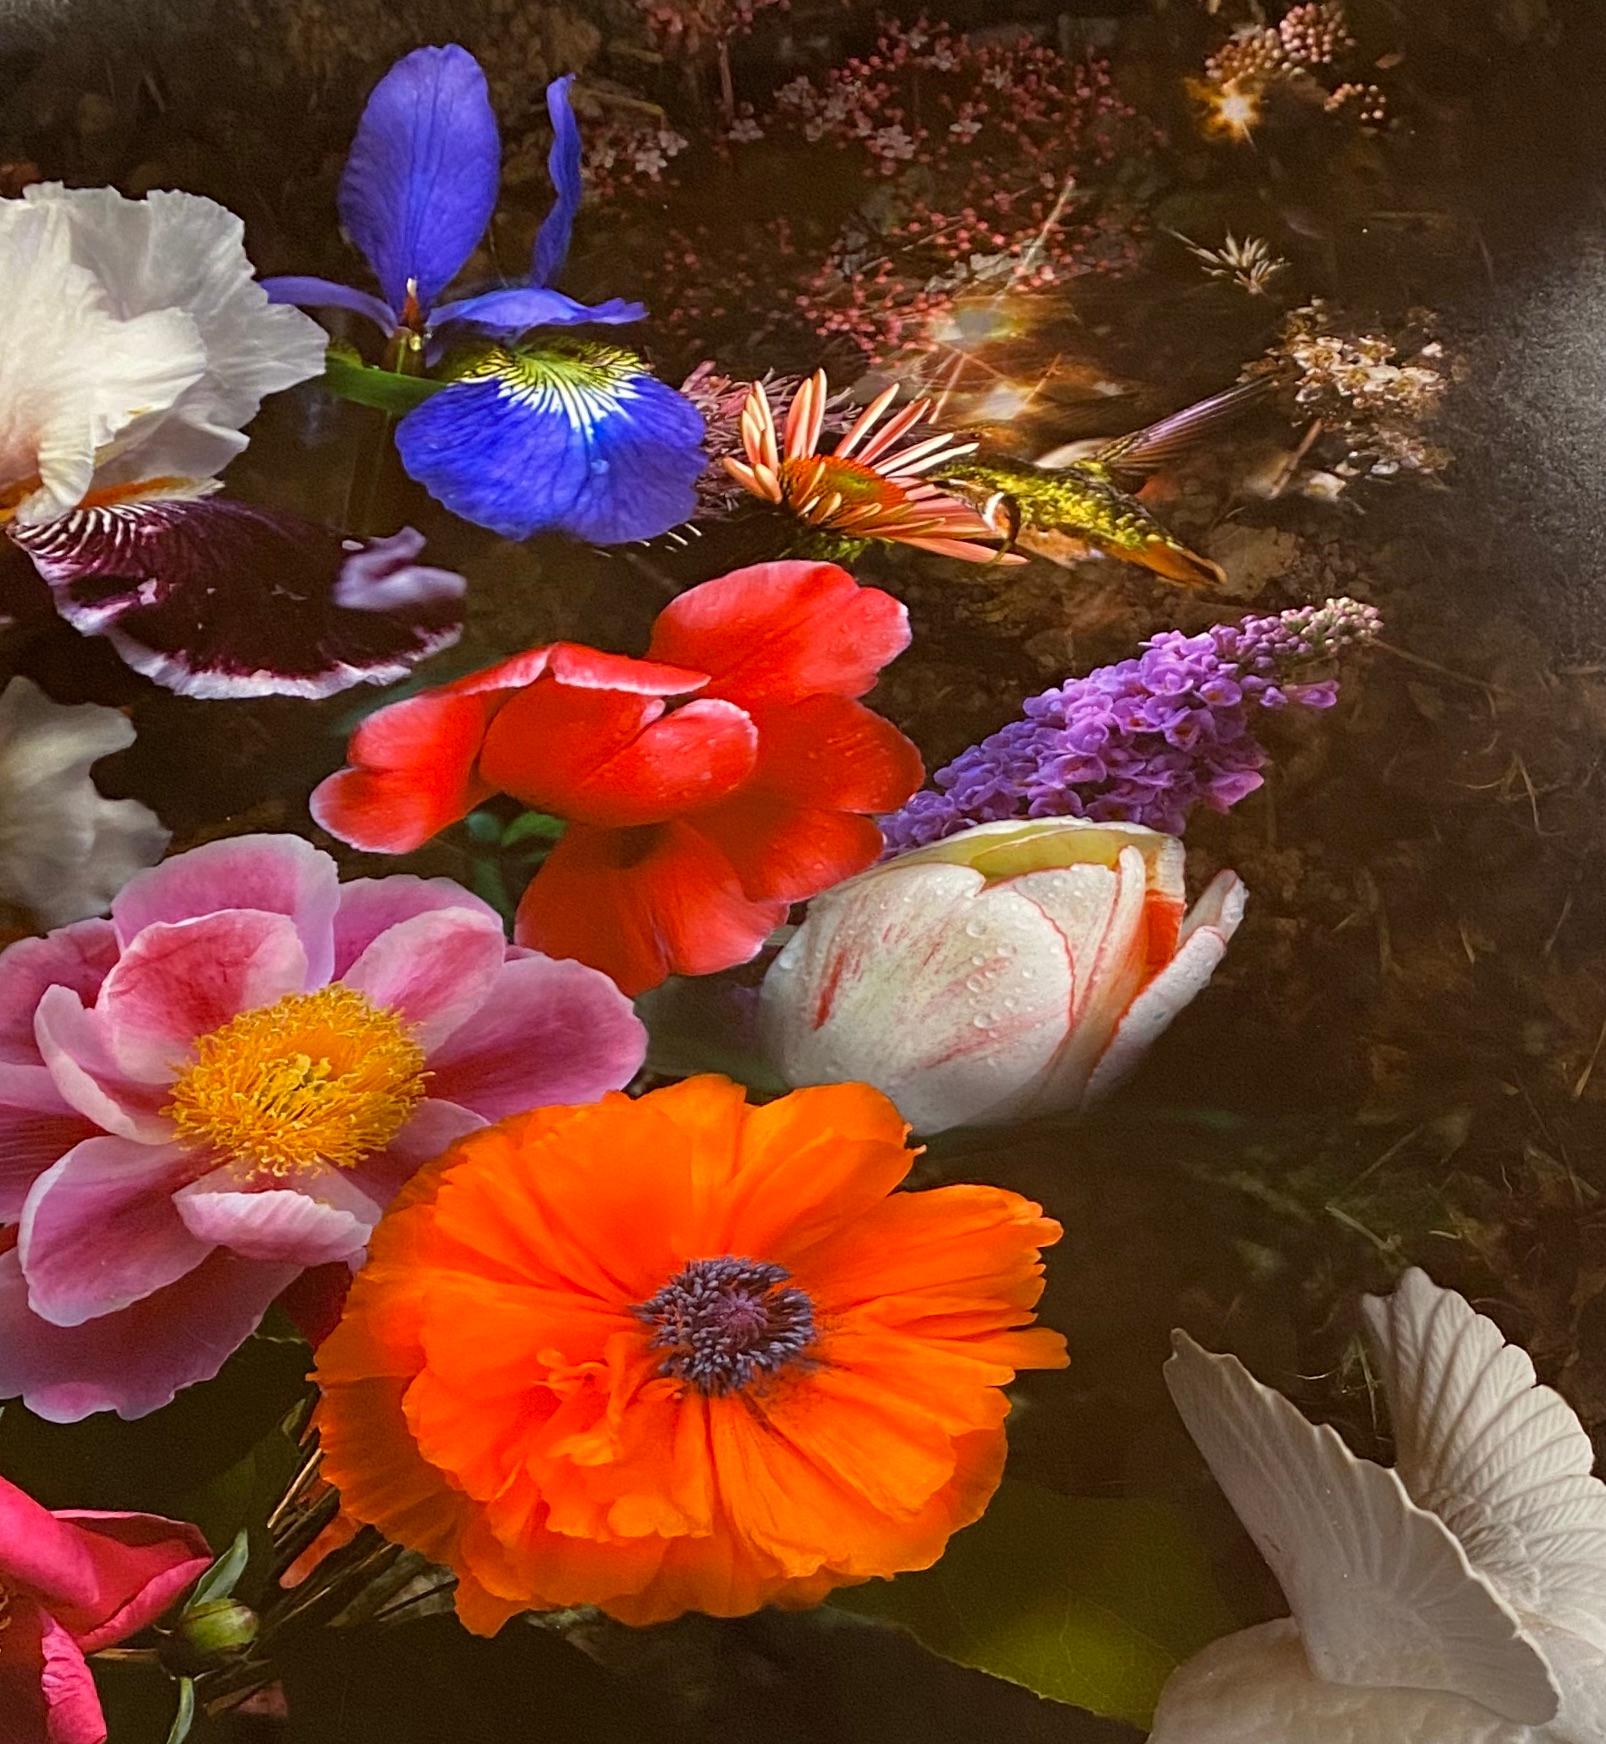 This botanical still life arrangement of orange, pink, yellow and purple flowers is dramatic and mysterious against a dark black background. A white porcelain bird figurine stands to the right of the bouquet, a crystal geode and shell to the